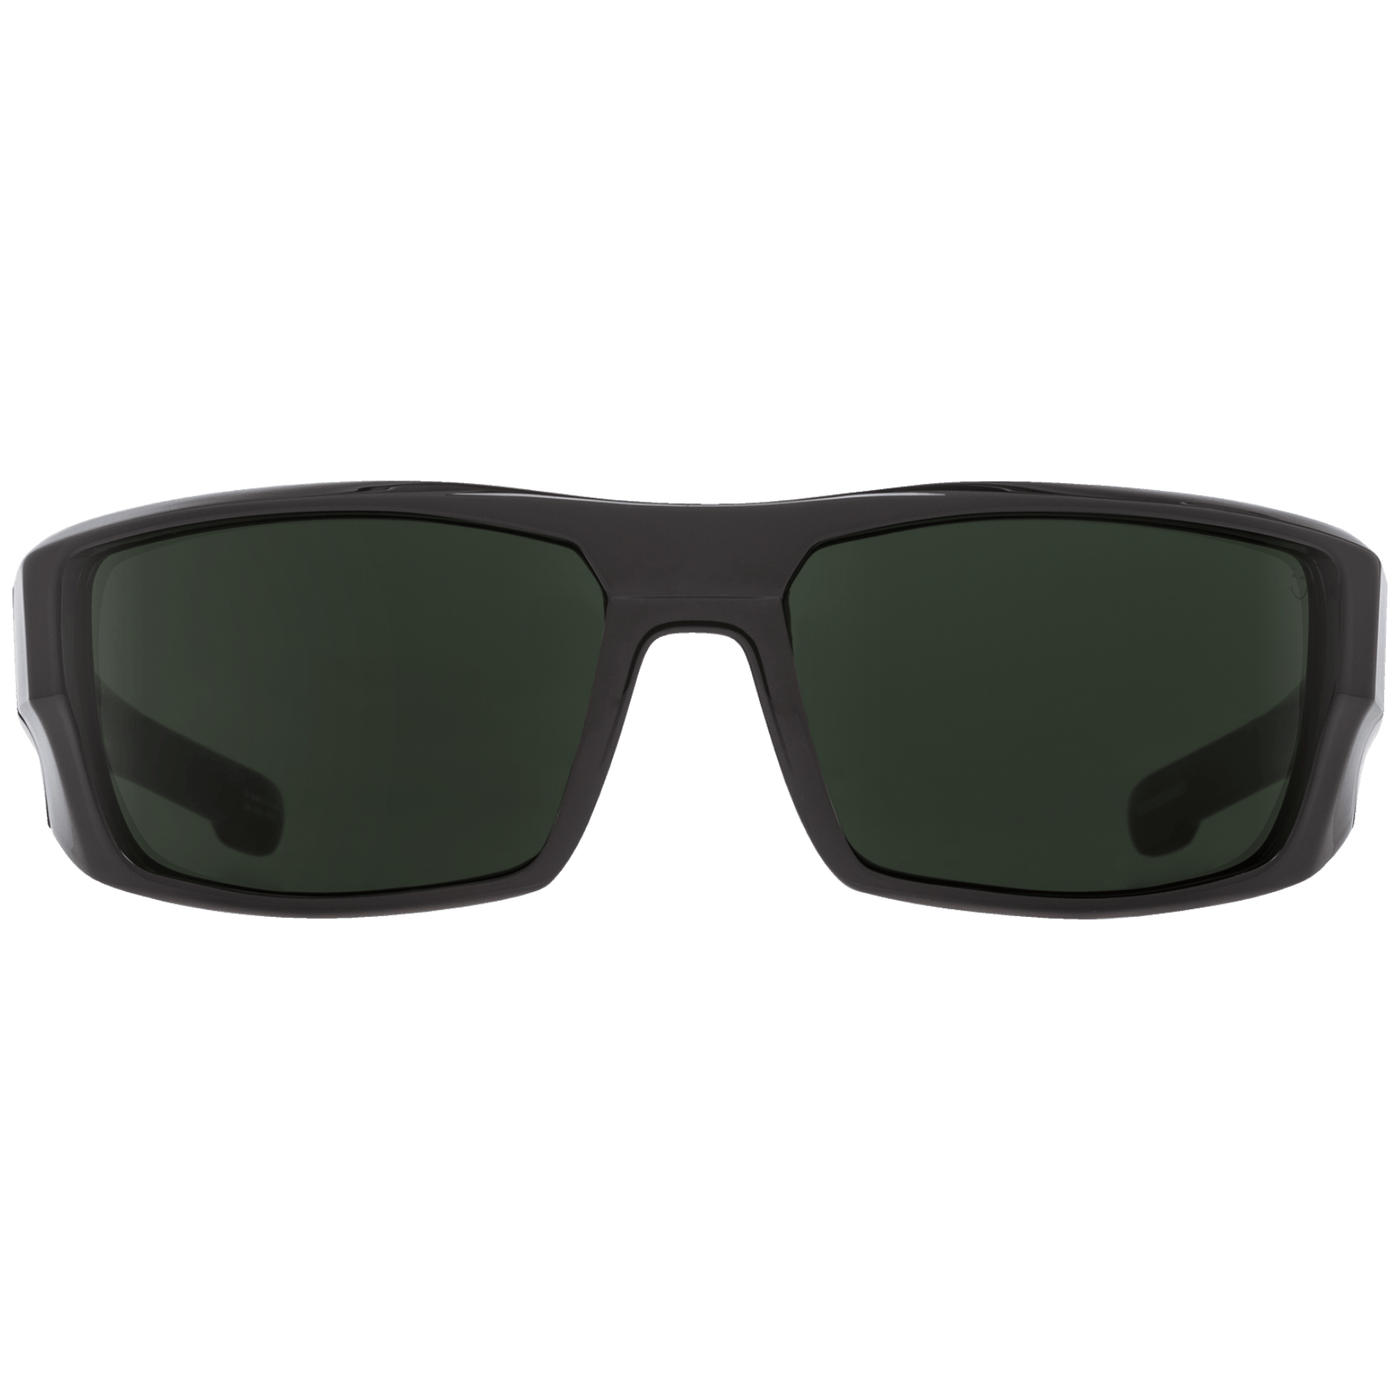 black sunglasses for cycling